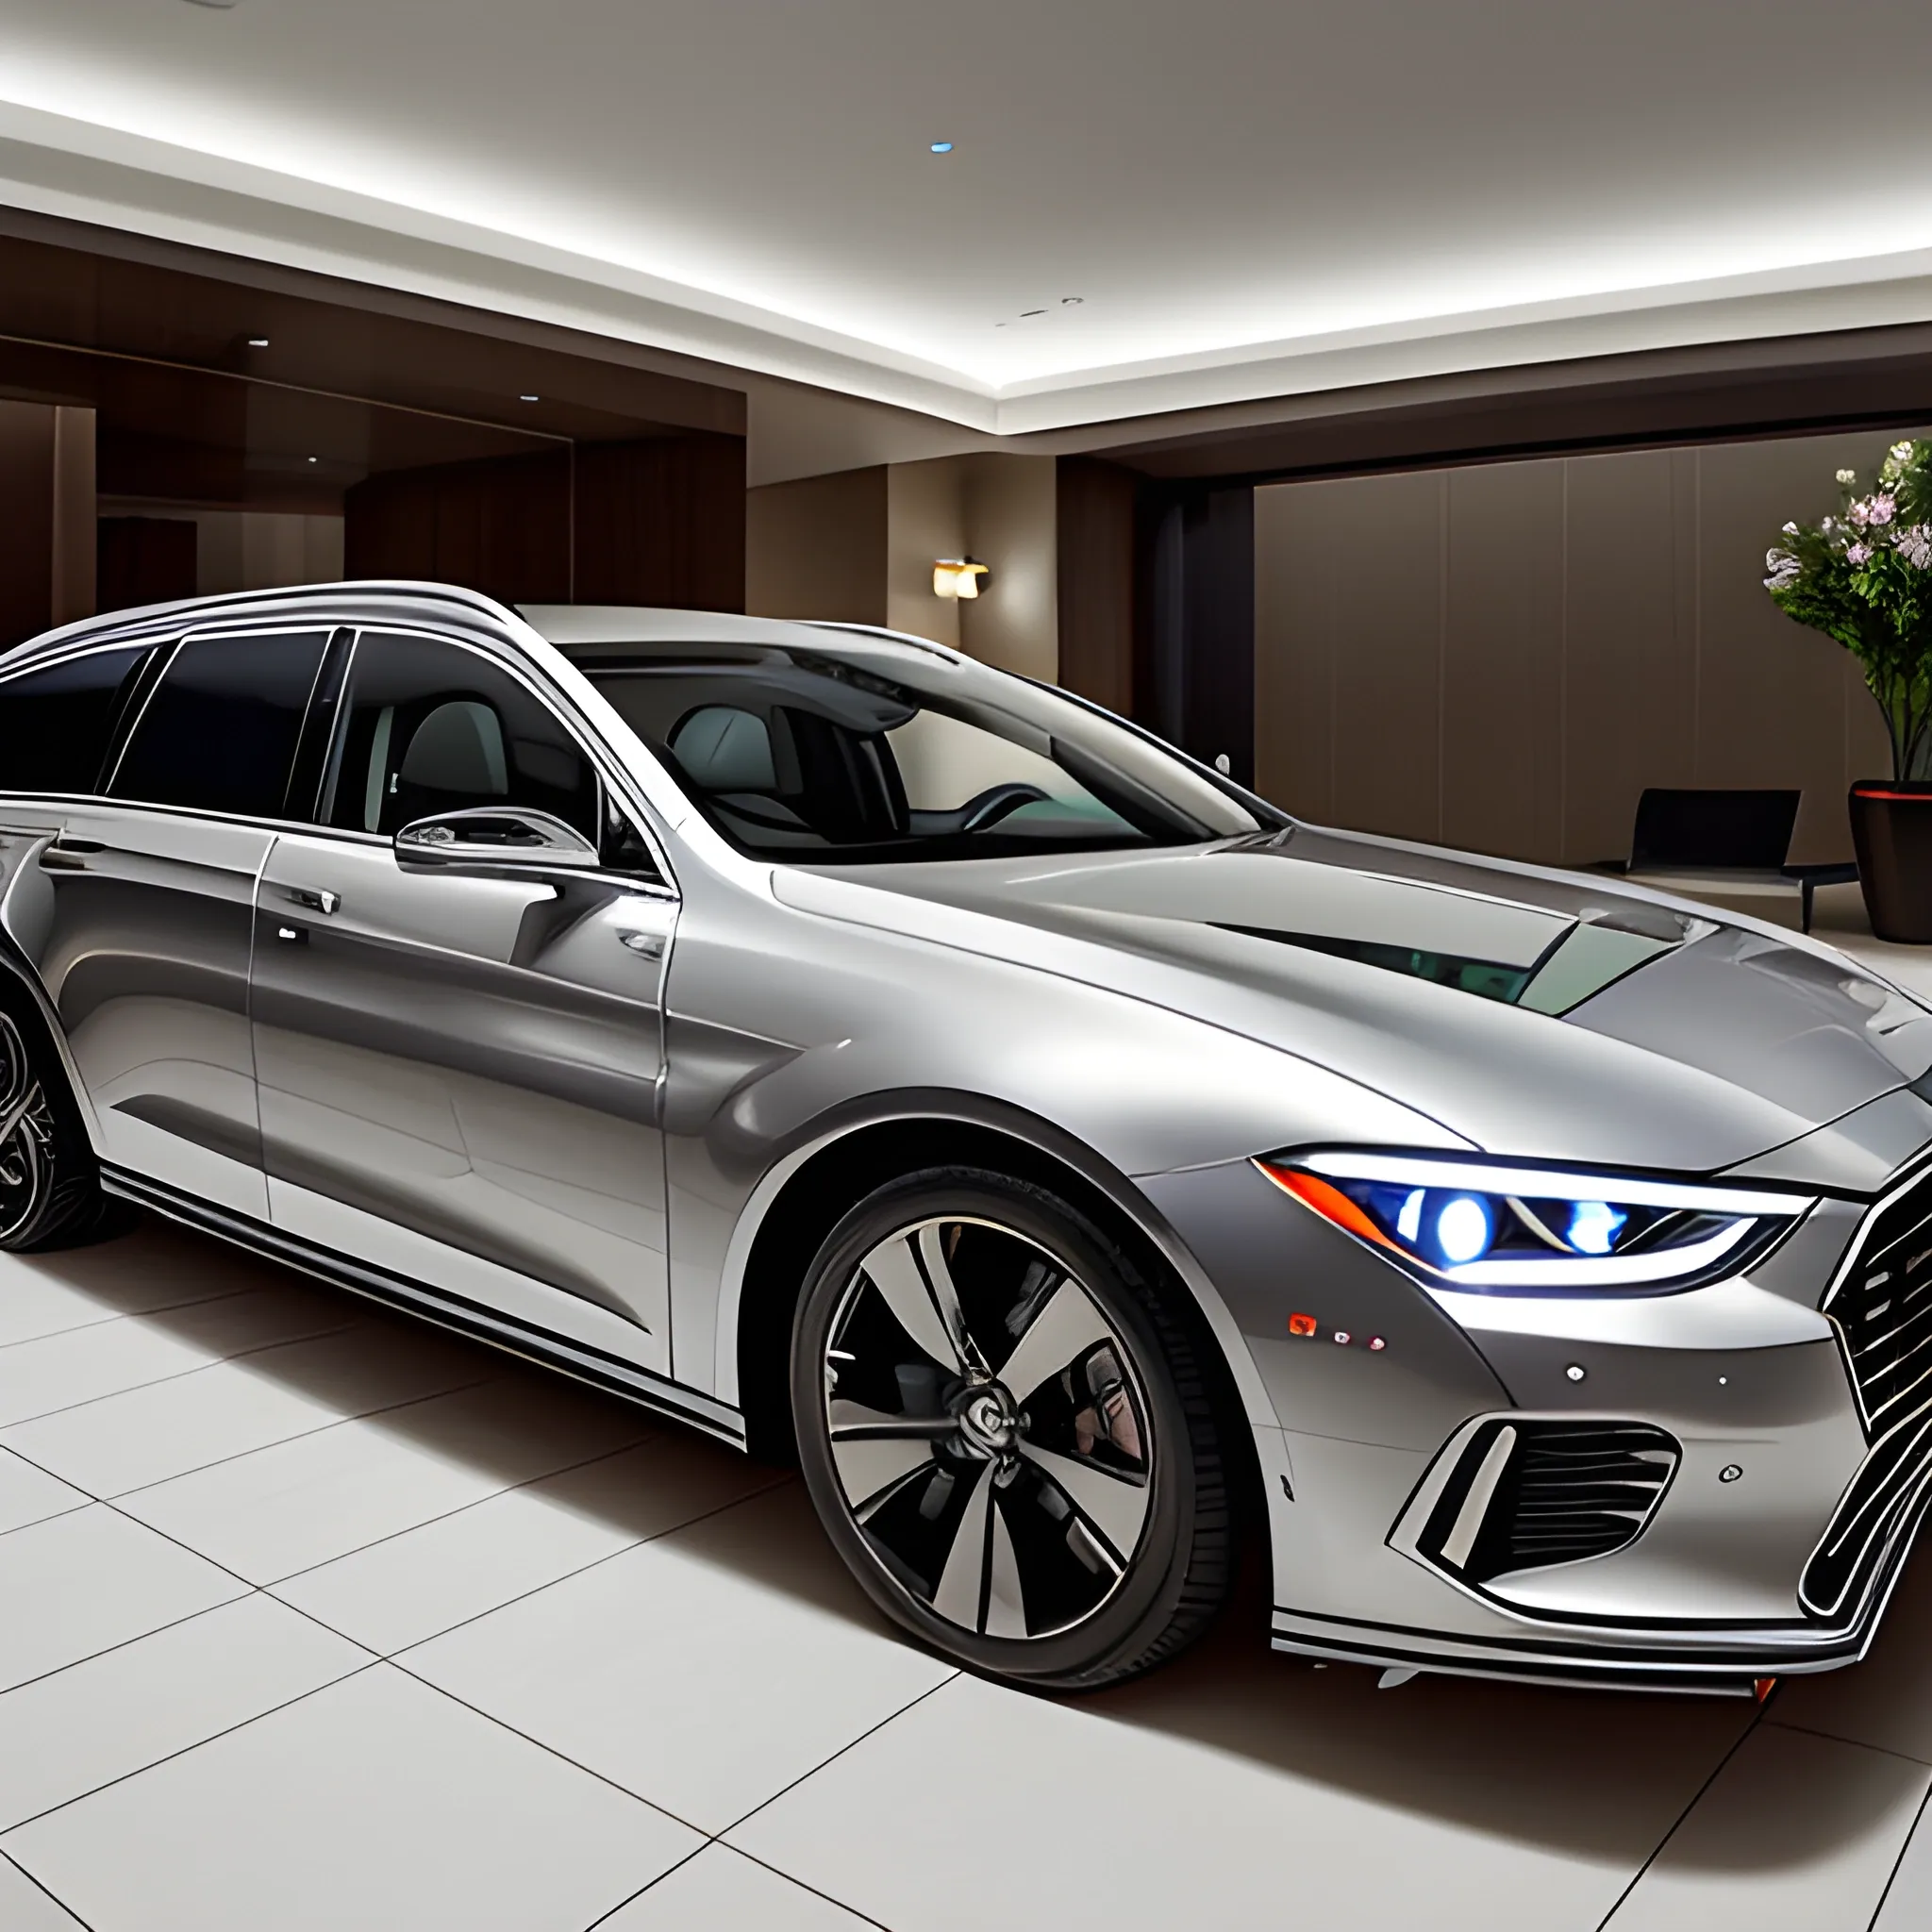 A silver, sleek Anstation wagon was parked at the entrance of the 5-star hotel，Style like photography，Modern situation



